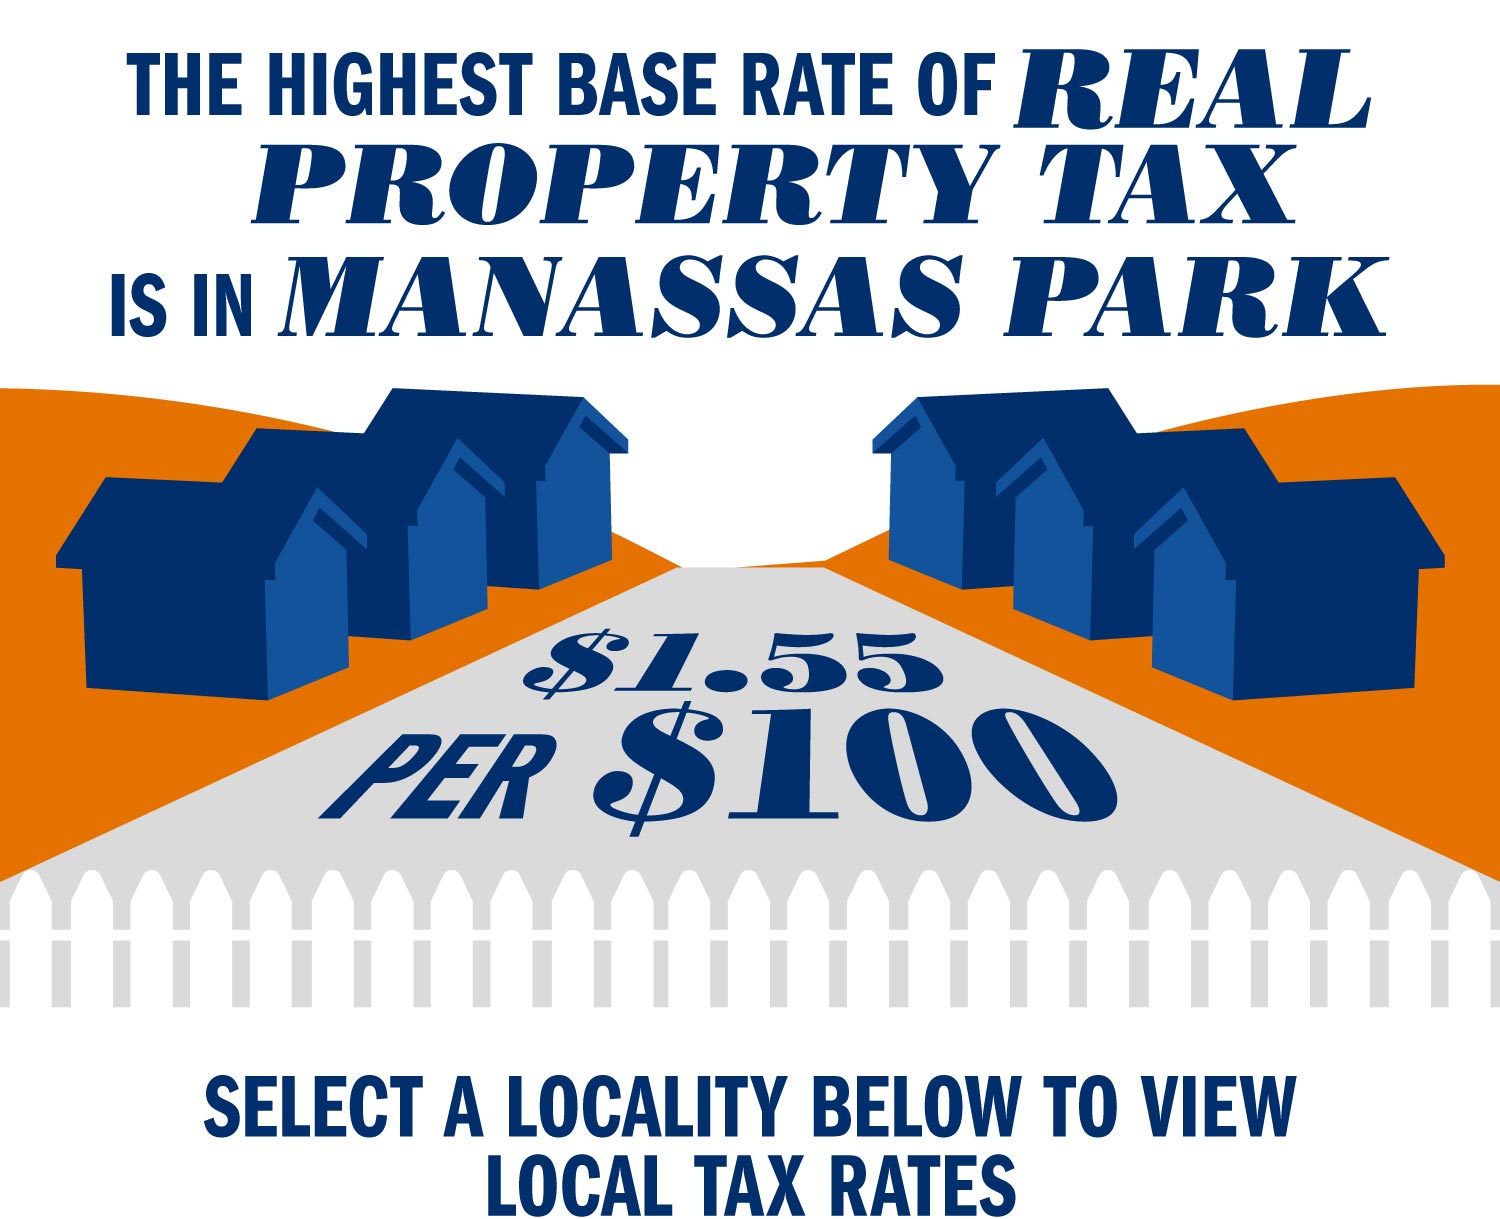 Text reads: The highest base rate of real property tax is in Manassas park $1.55 per $100.  Select a locality below to view local tax rates